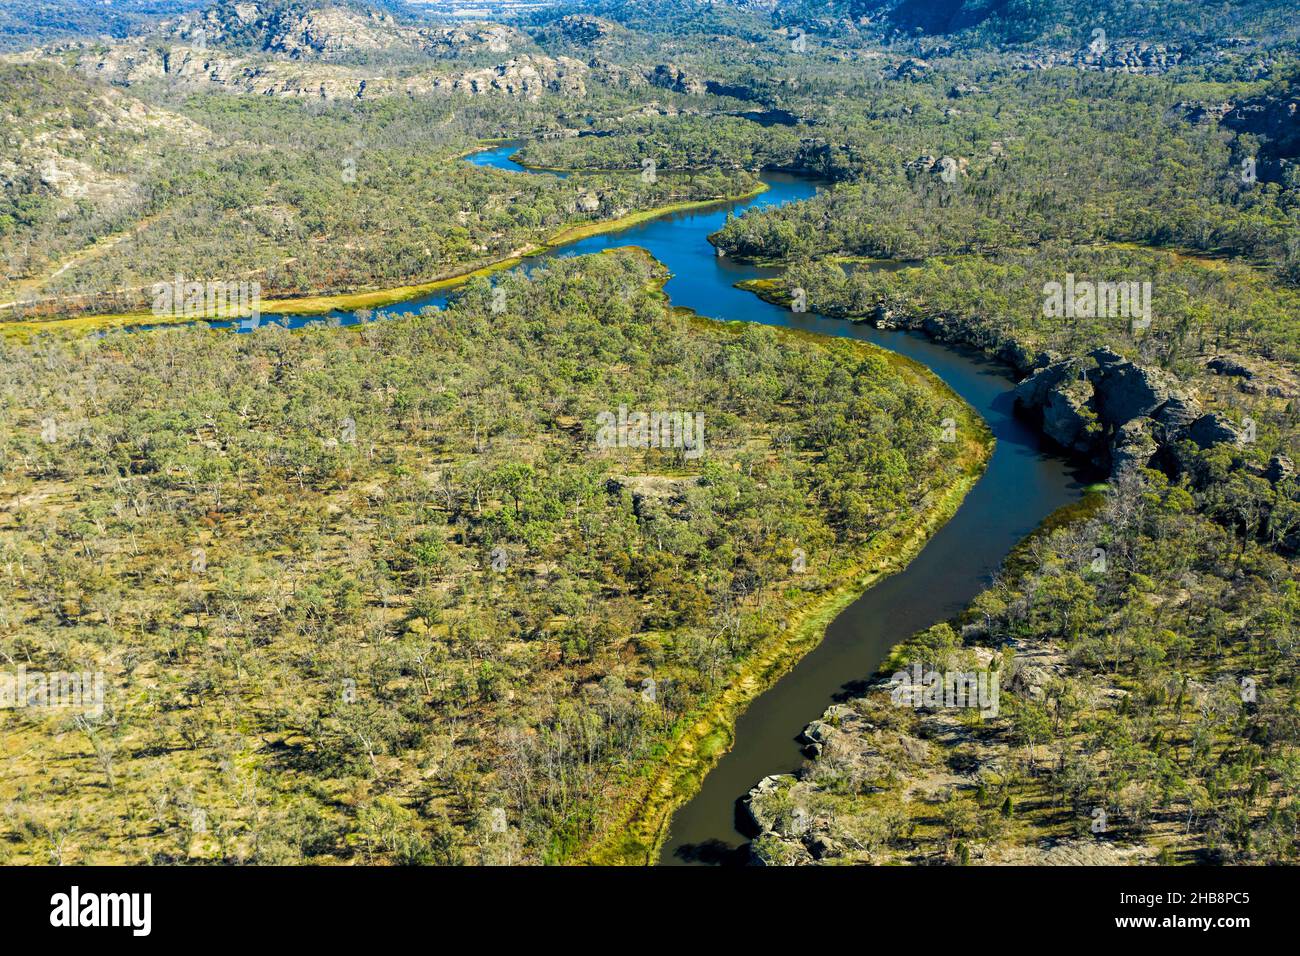 Australia, NSW, Ganguddy, Aerial view of Dunns Swamp and river in Wollemi National Park Stock Photo